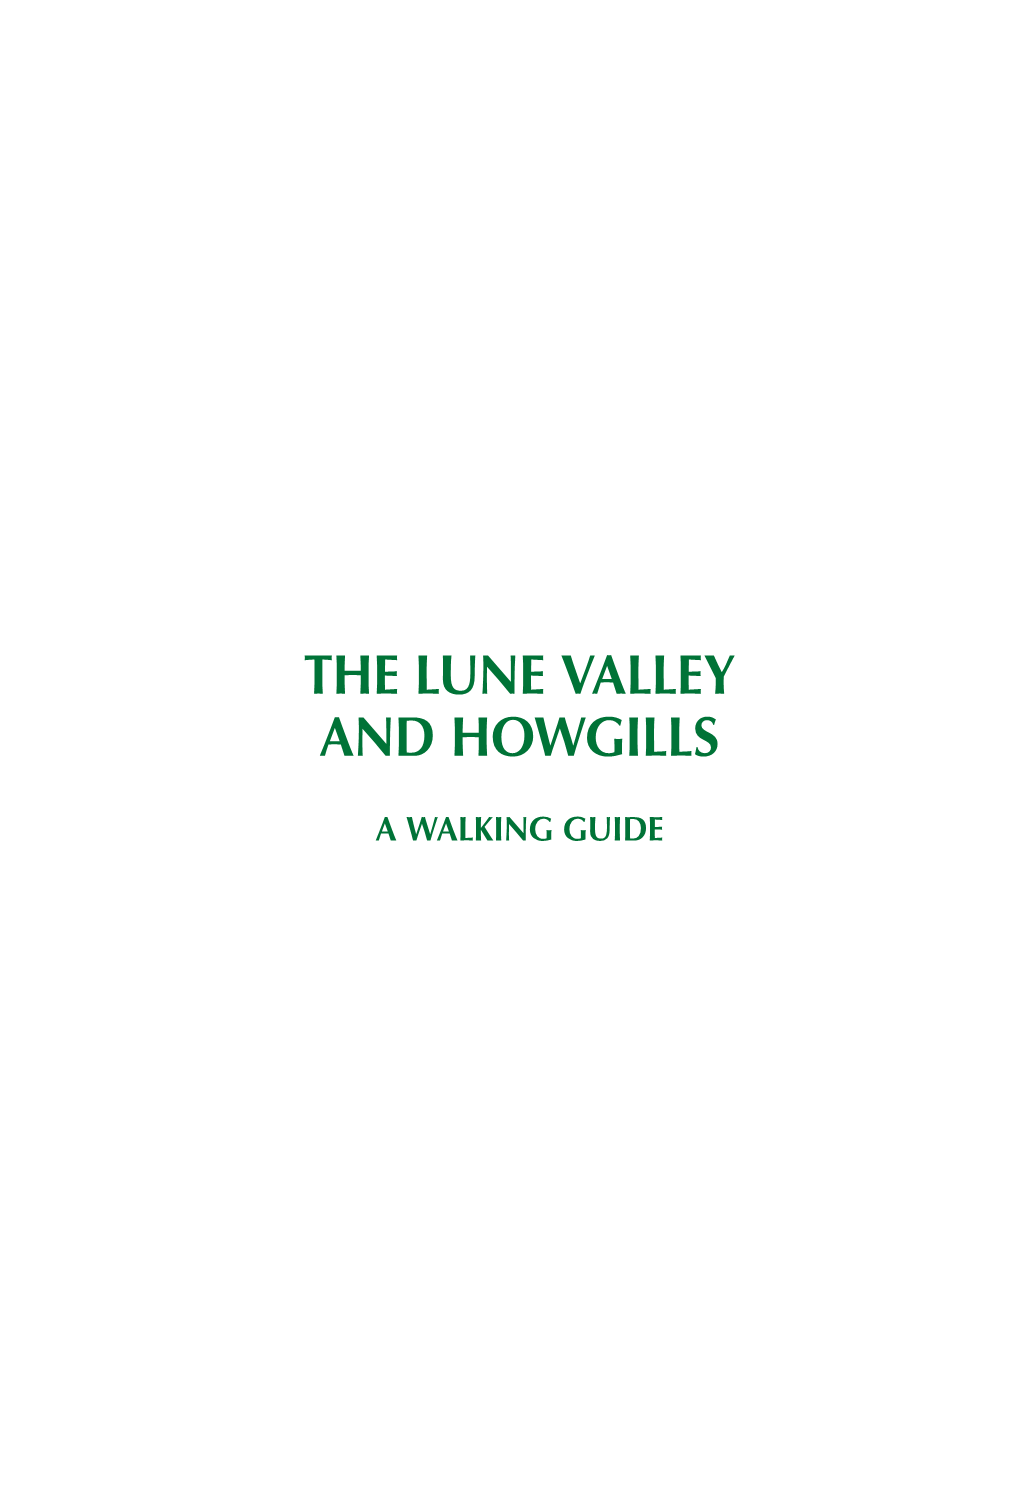 The Lune Valley and Howgills